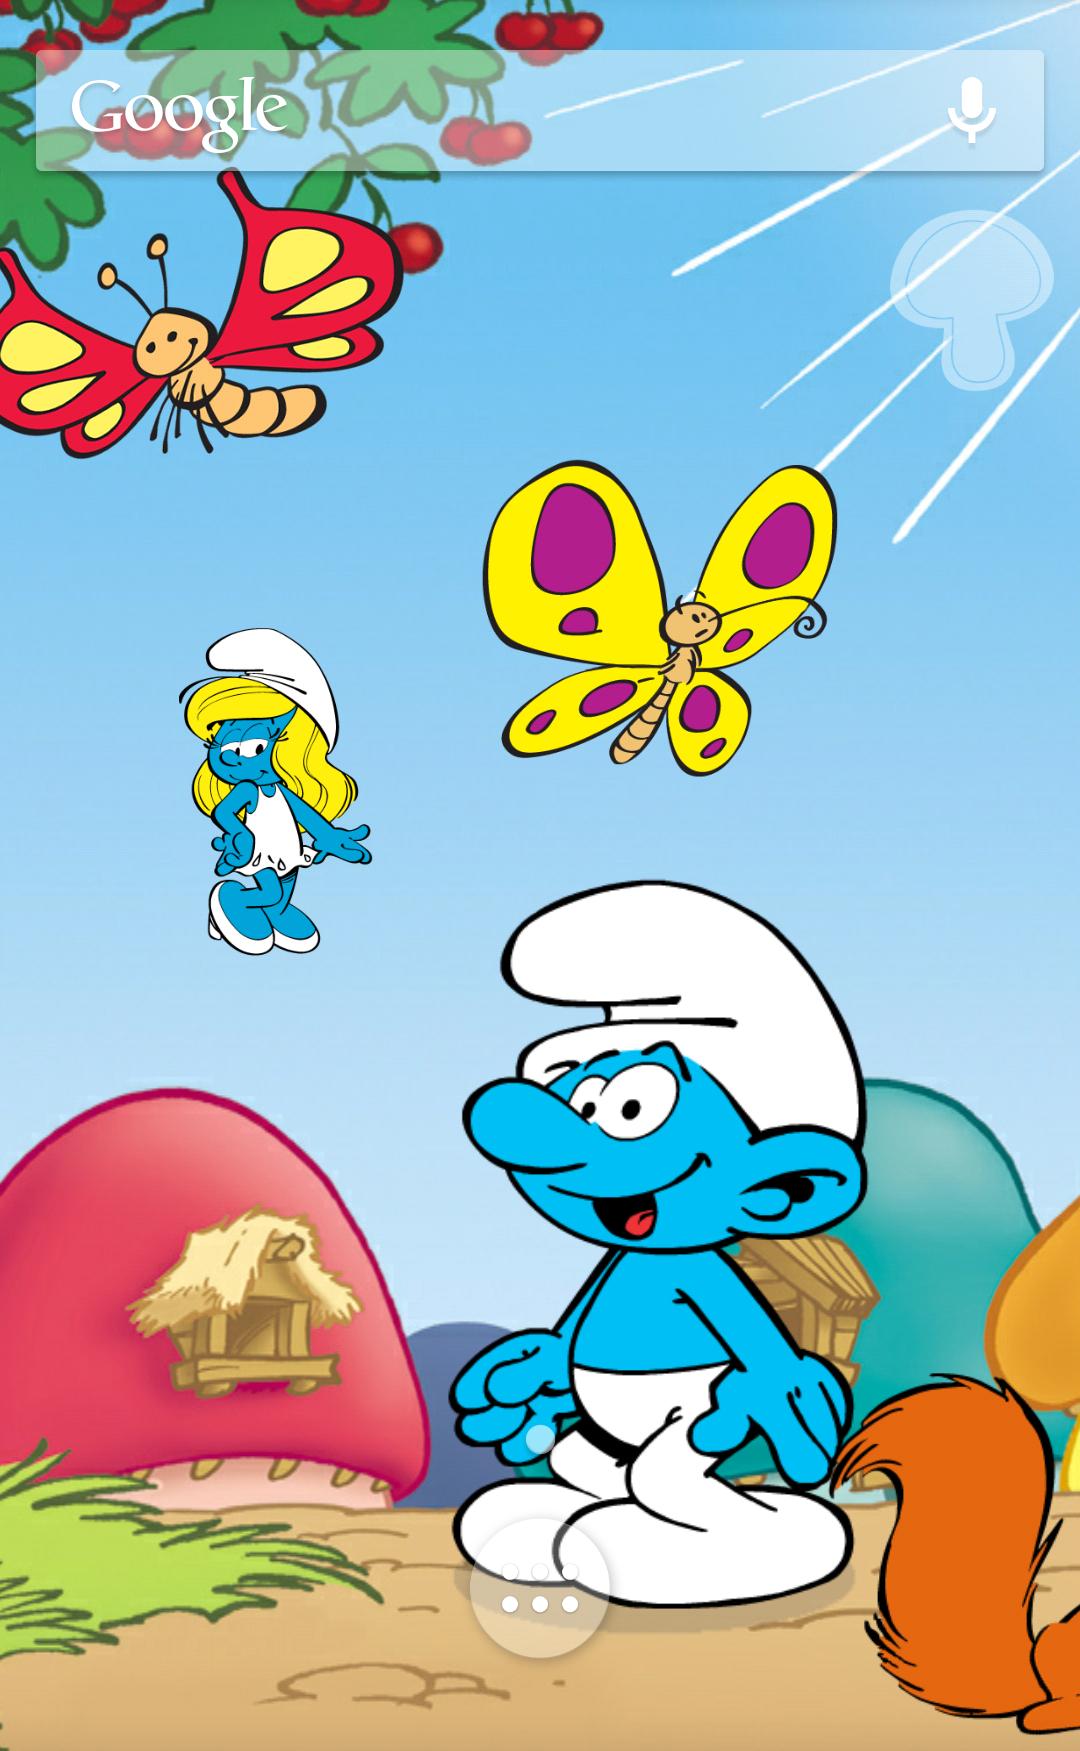 Tải xuống APK The Smurfs' New Live Wallpaper cho Android